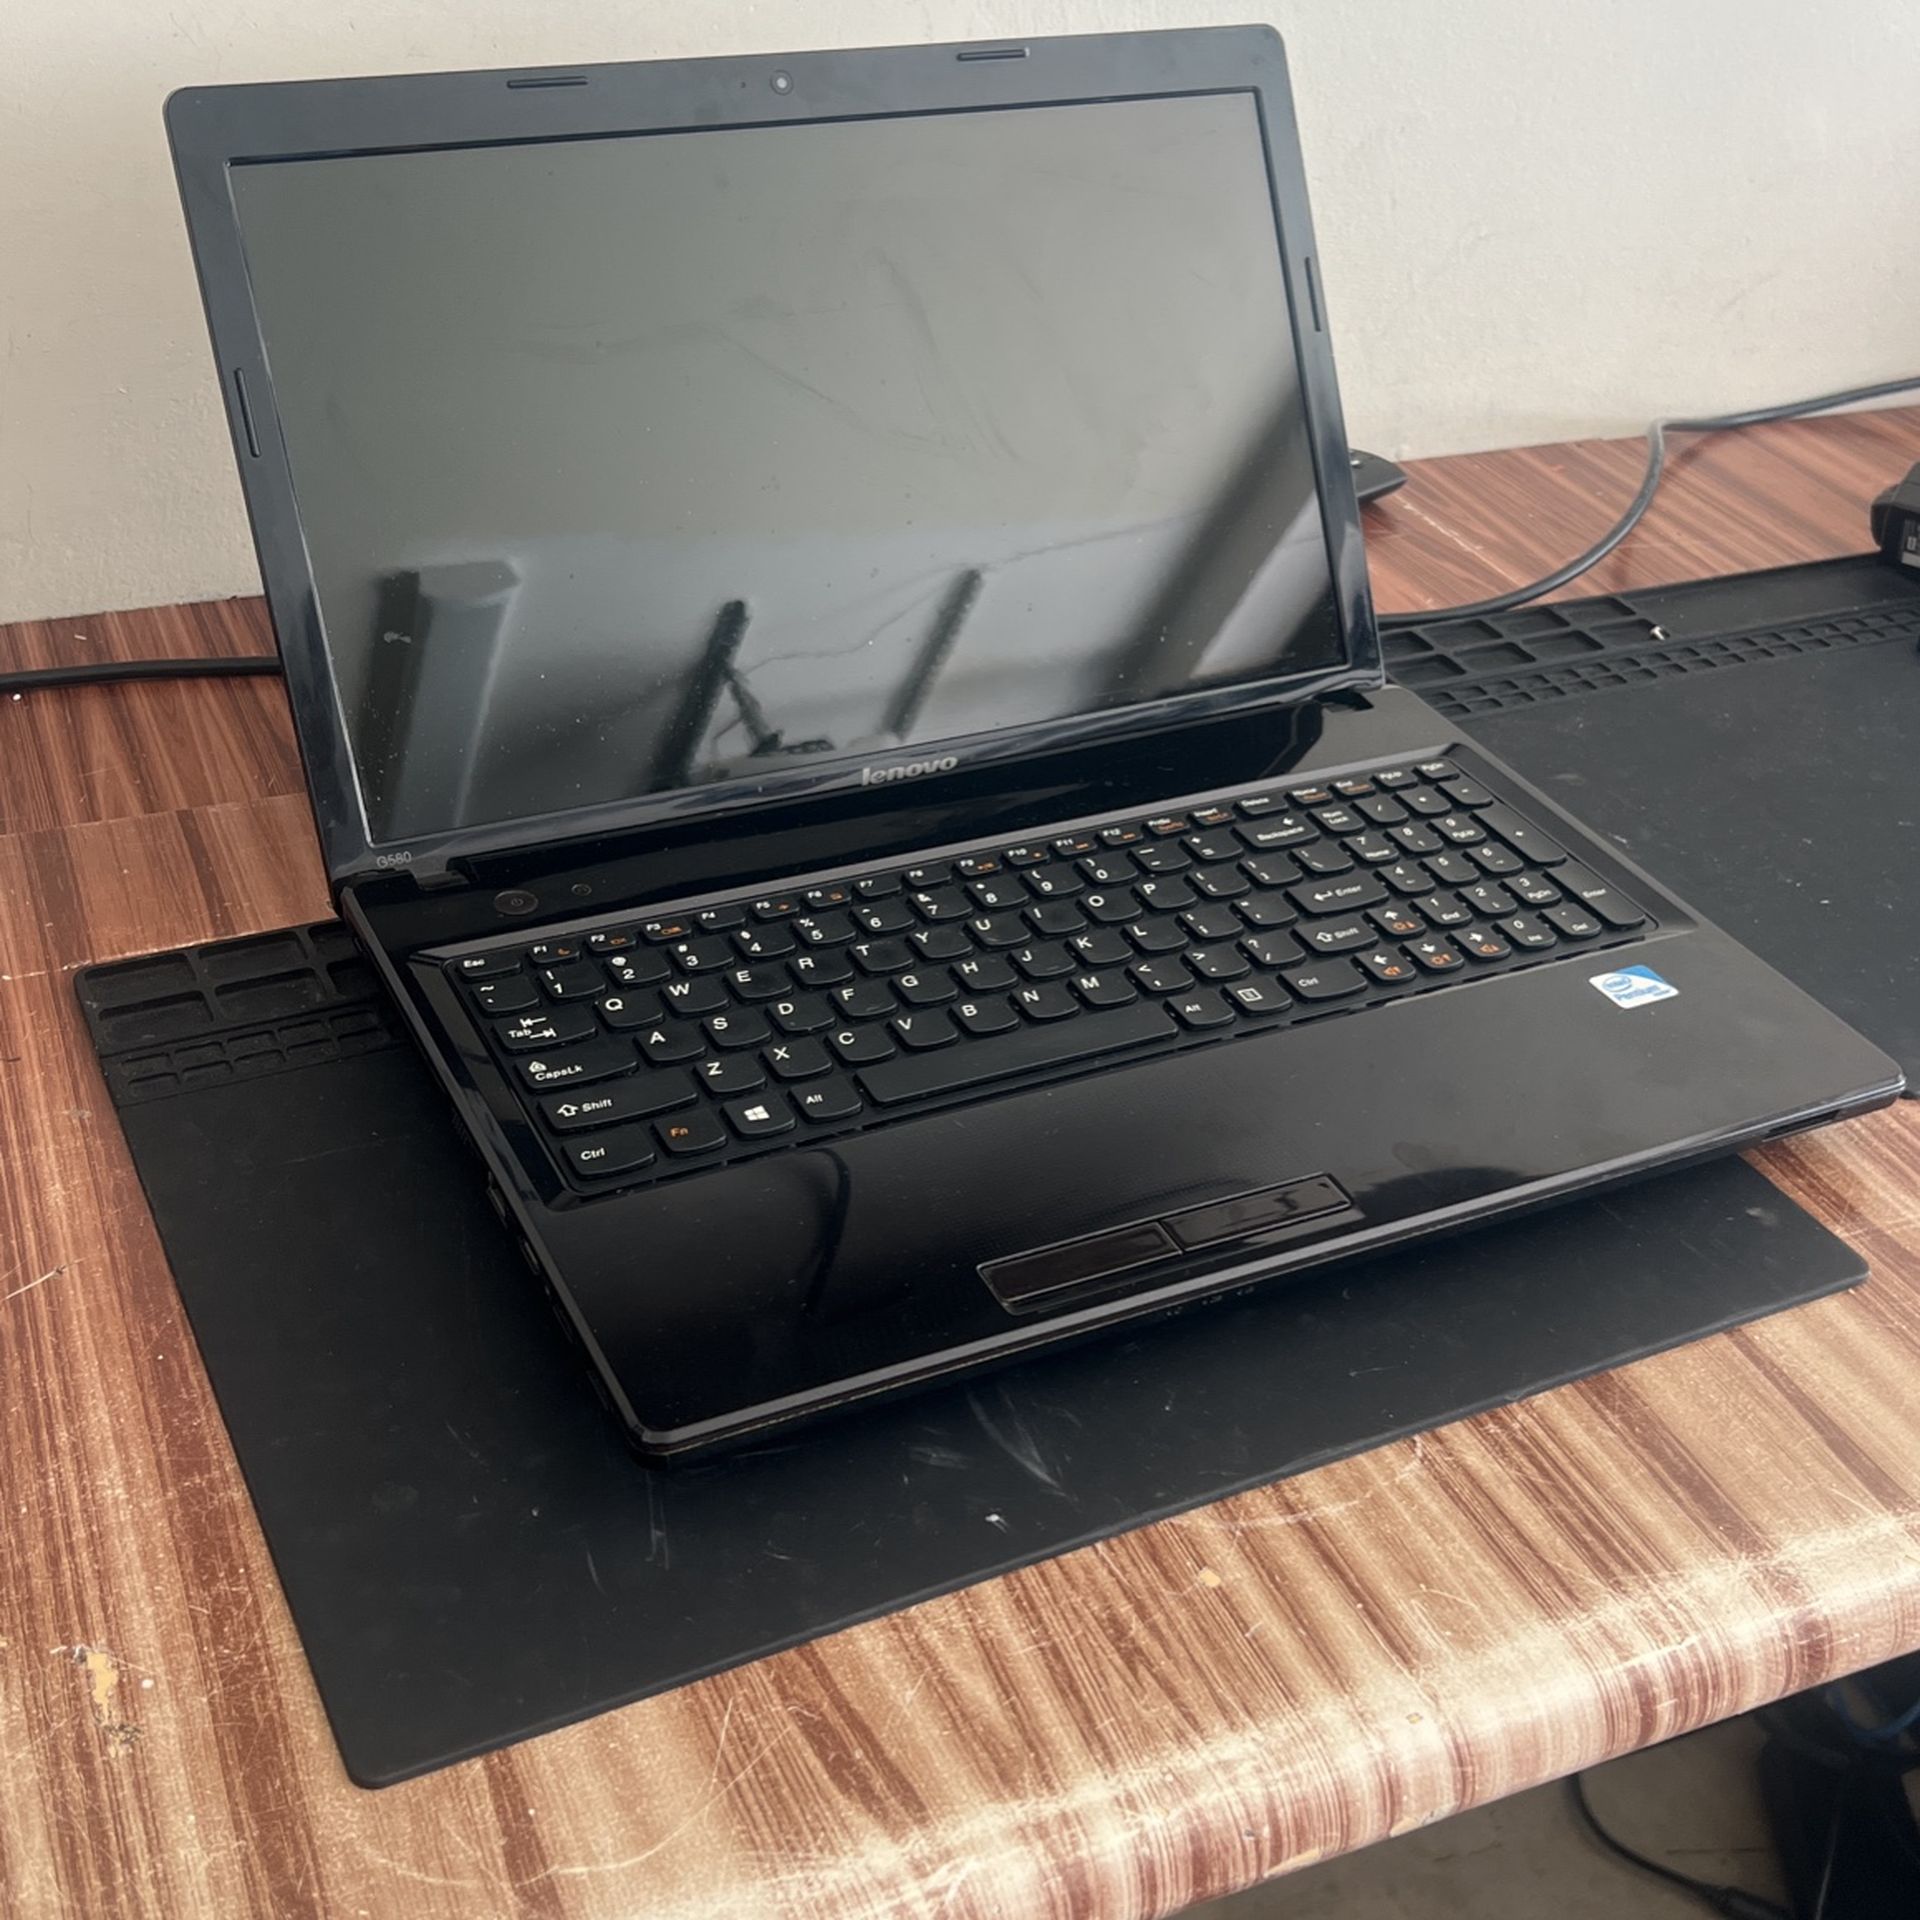 Lenovo G580 laptop for parts or repairs. Read below! 👇